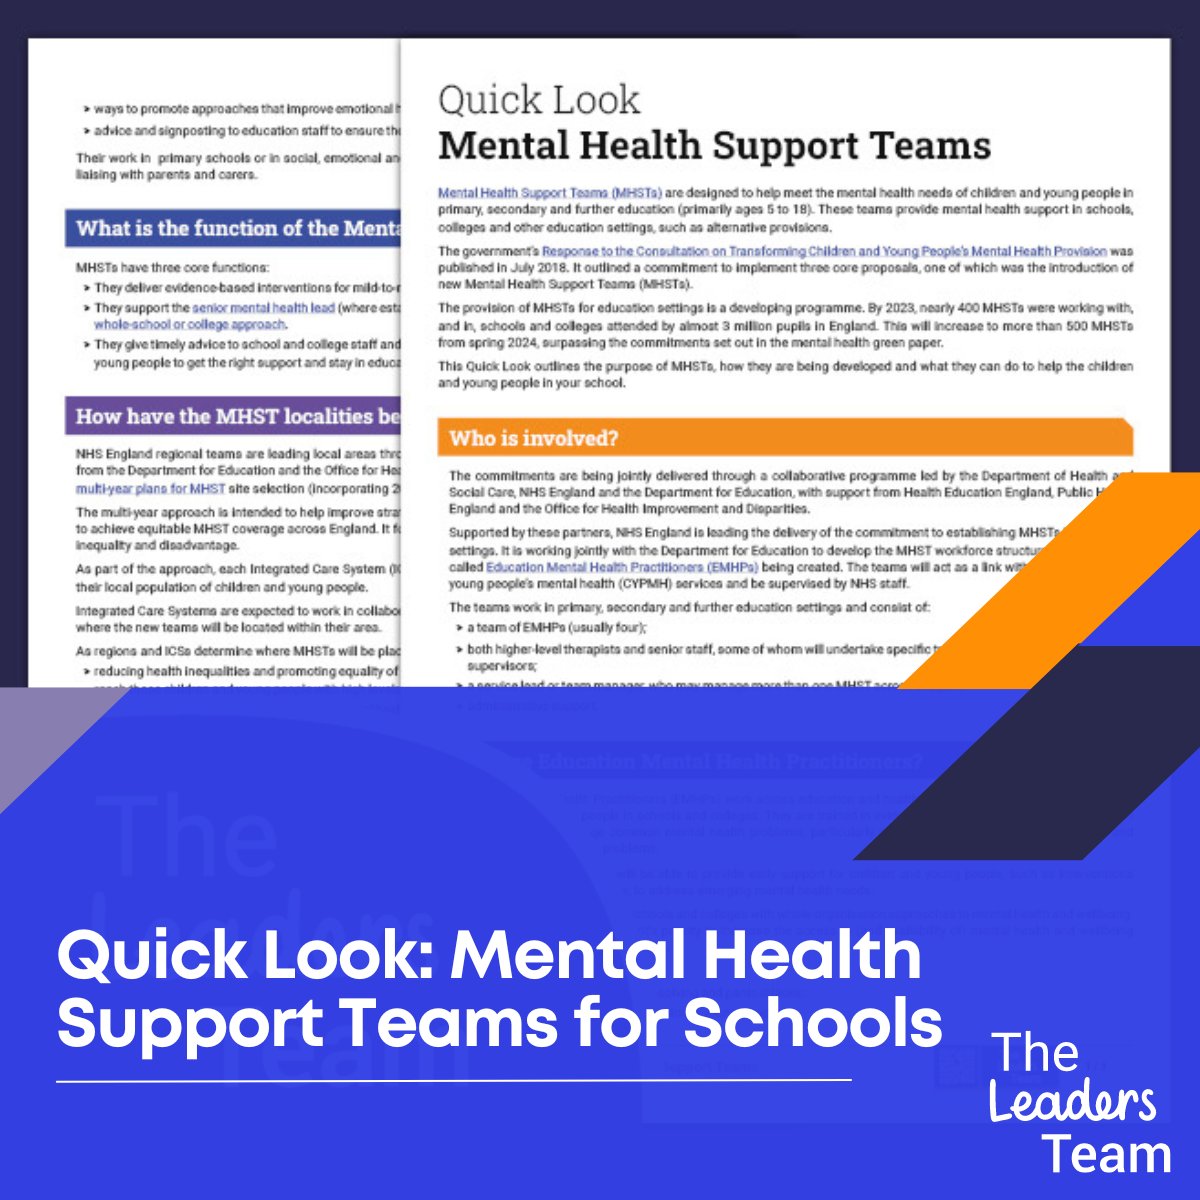 Explore how Mental Health Support Teams (MHSTs) can aid your school with early intervention and mental wellbeing promotion. Essential support for students and staff! #MentalHealth #SchoolSupport #Wellbeing
🔗twinkl.co.uk/l/ypckl